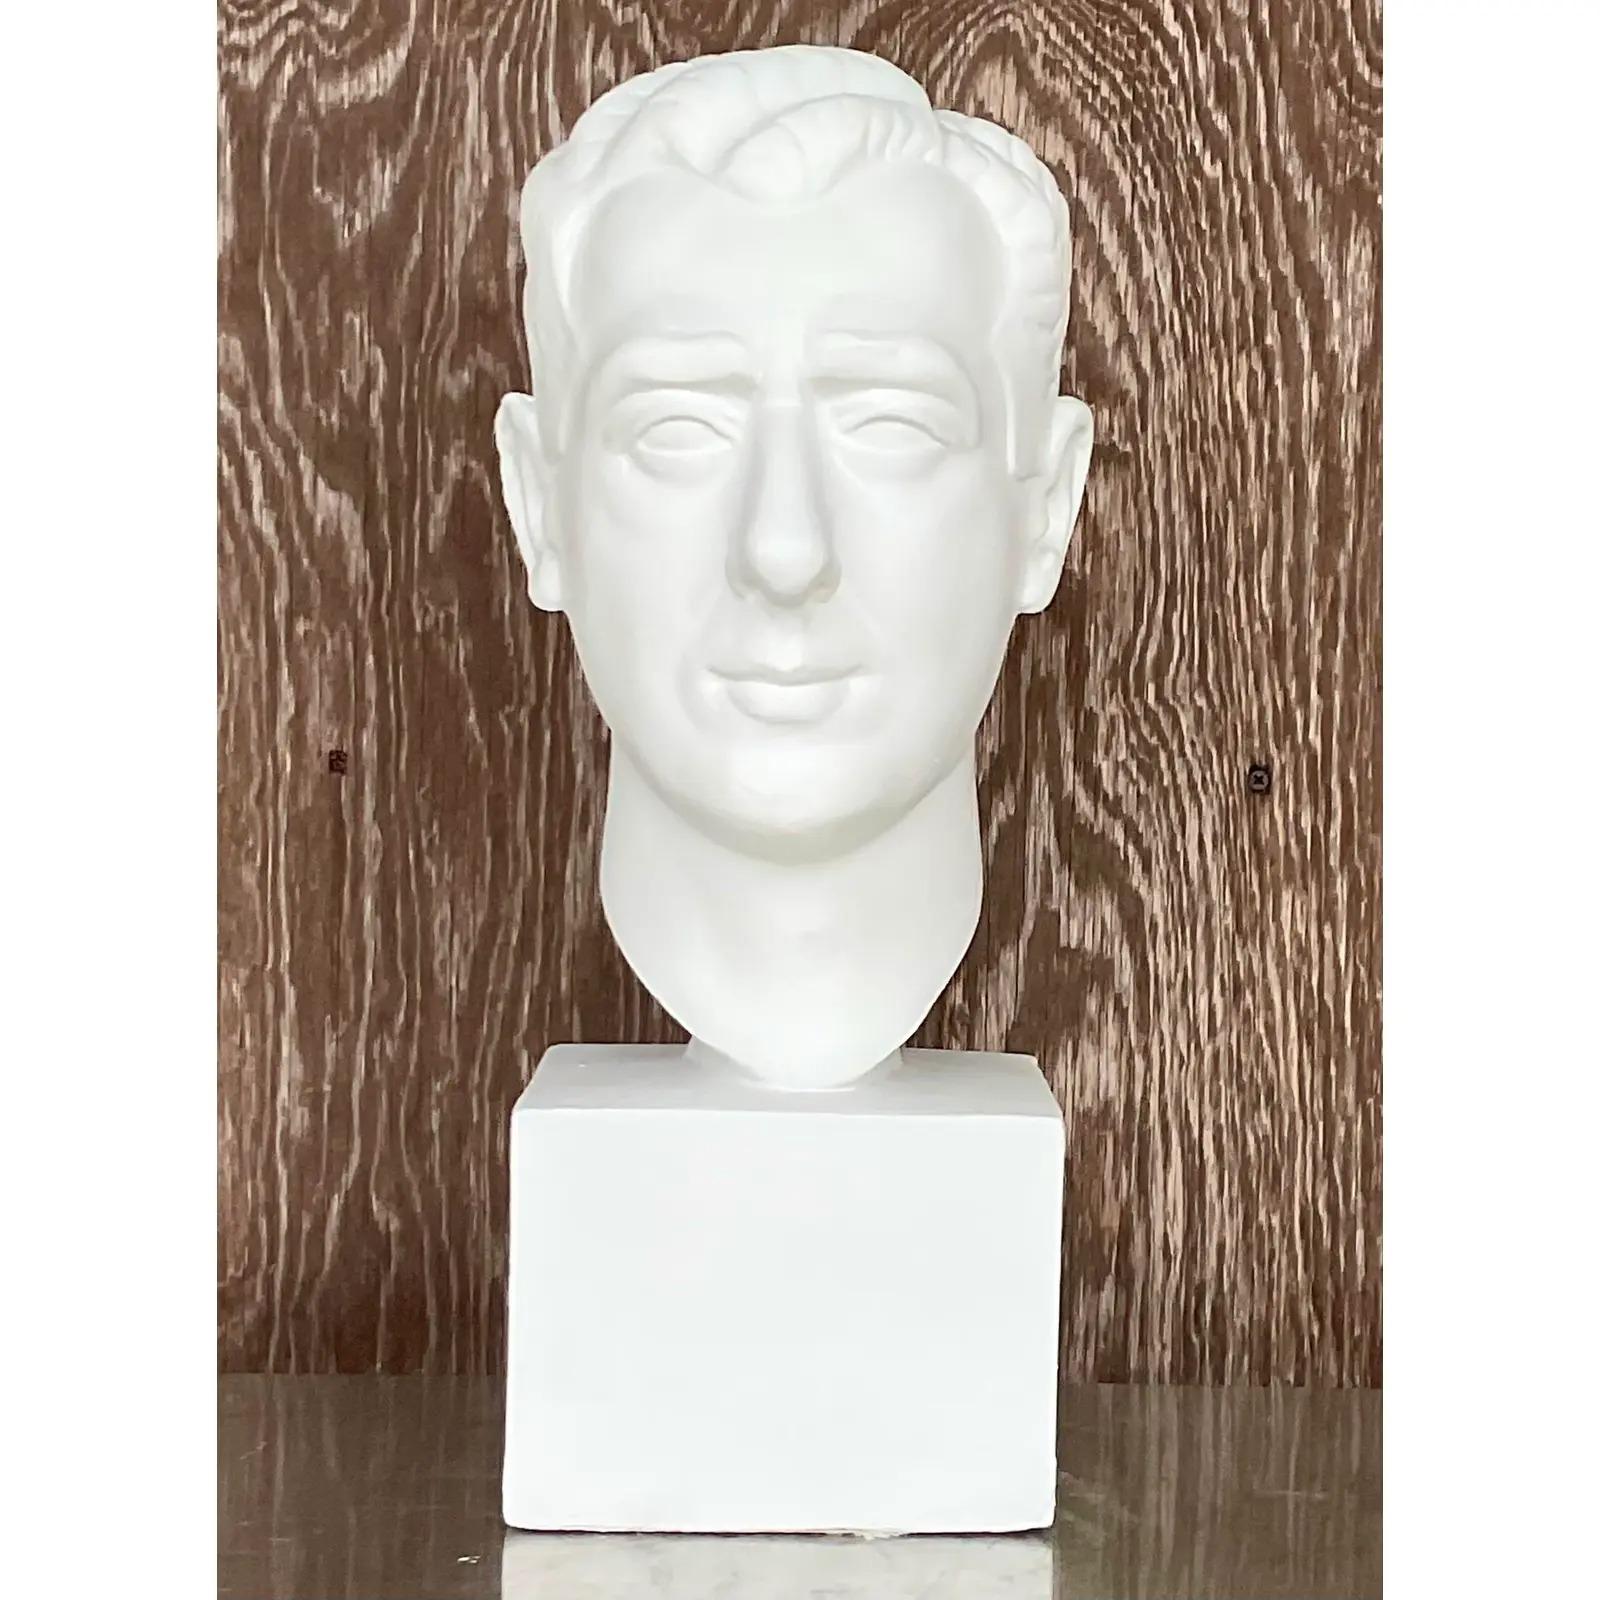 Fantastic vintage plaster sculpture of man. A handsome profile with stylish wavy hair. Rests on a plaster plinth. Acquired from a palm beach estate.